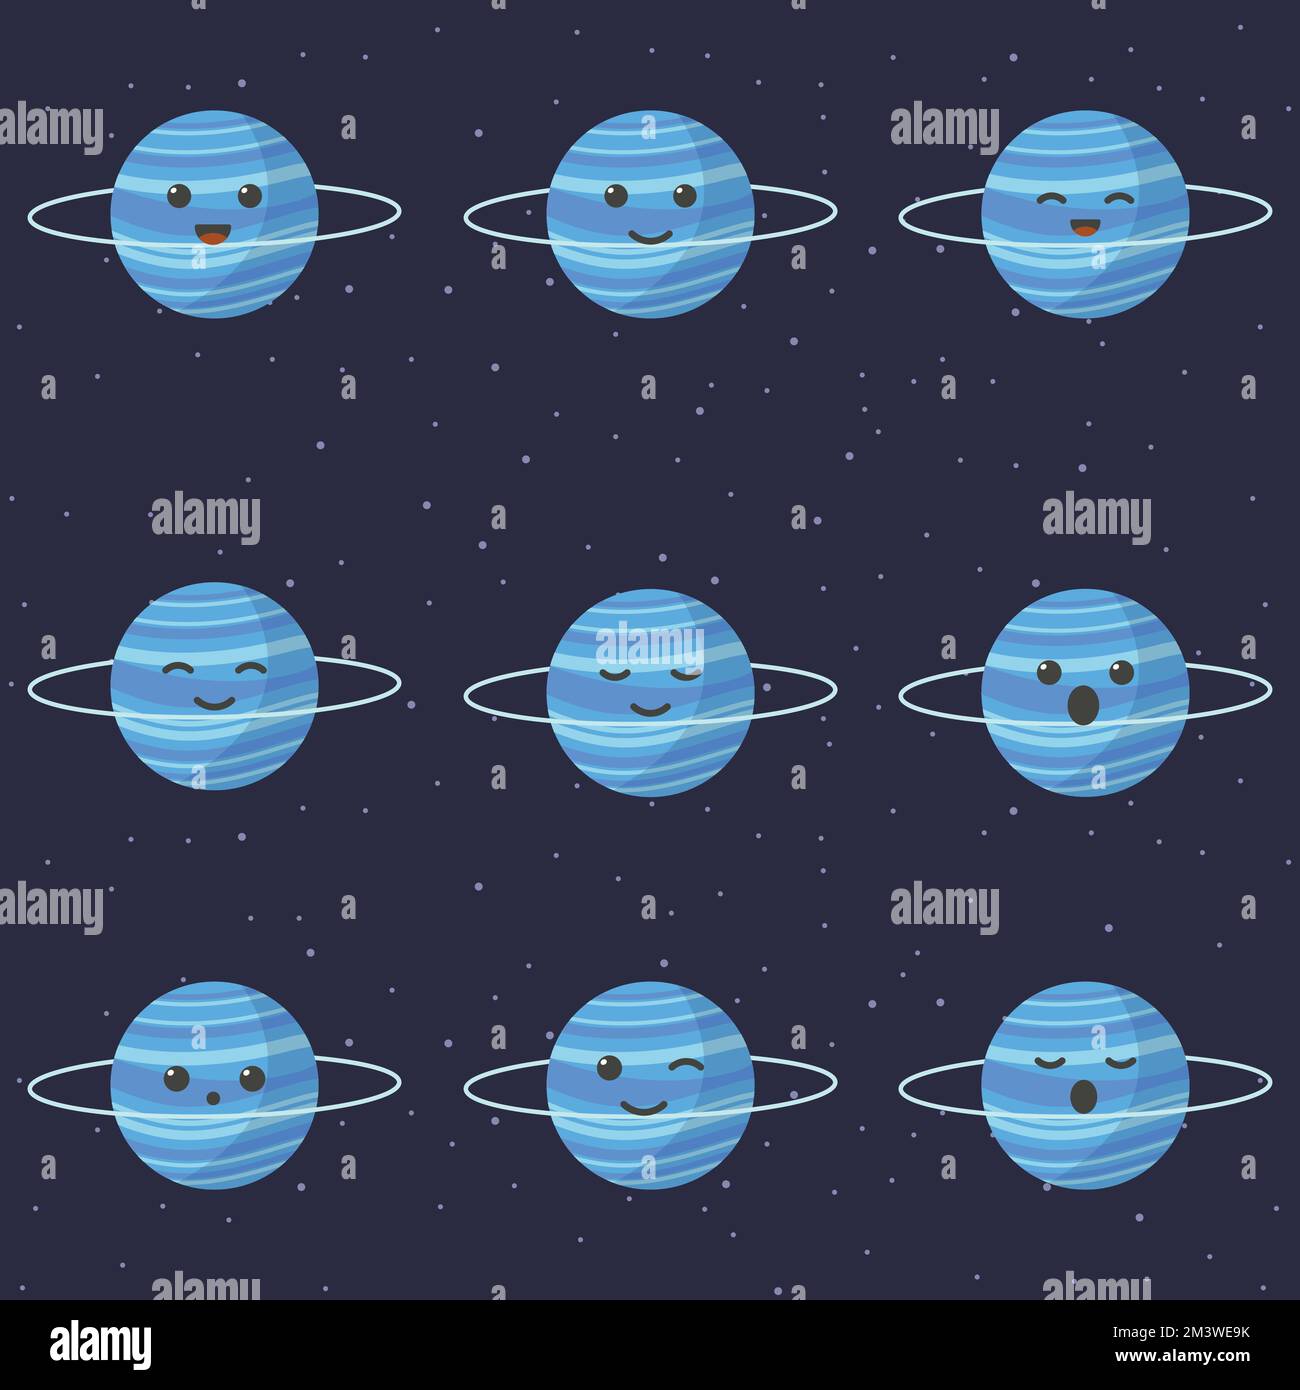 Cute planet uranus cartoon character. Set of cute cartoon planets with different emotions. Vector illustration Stock Vector